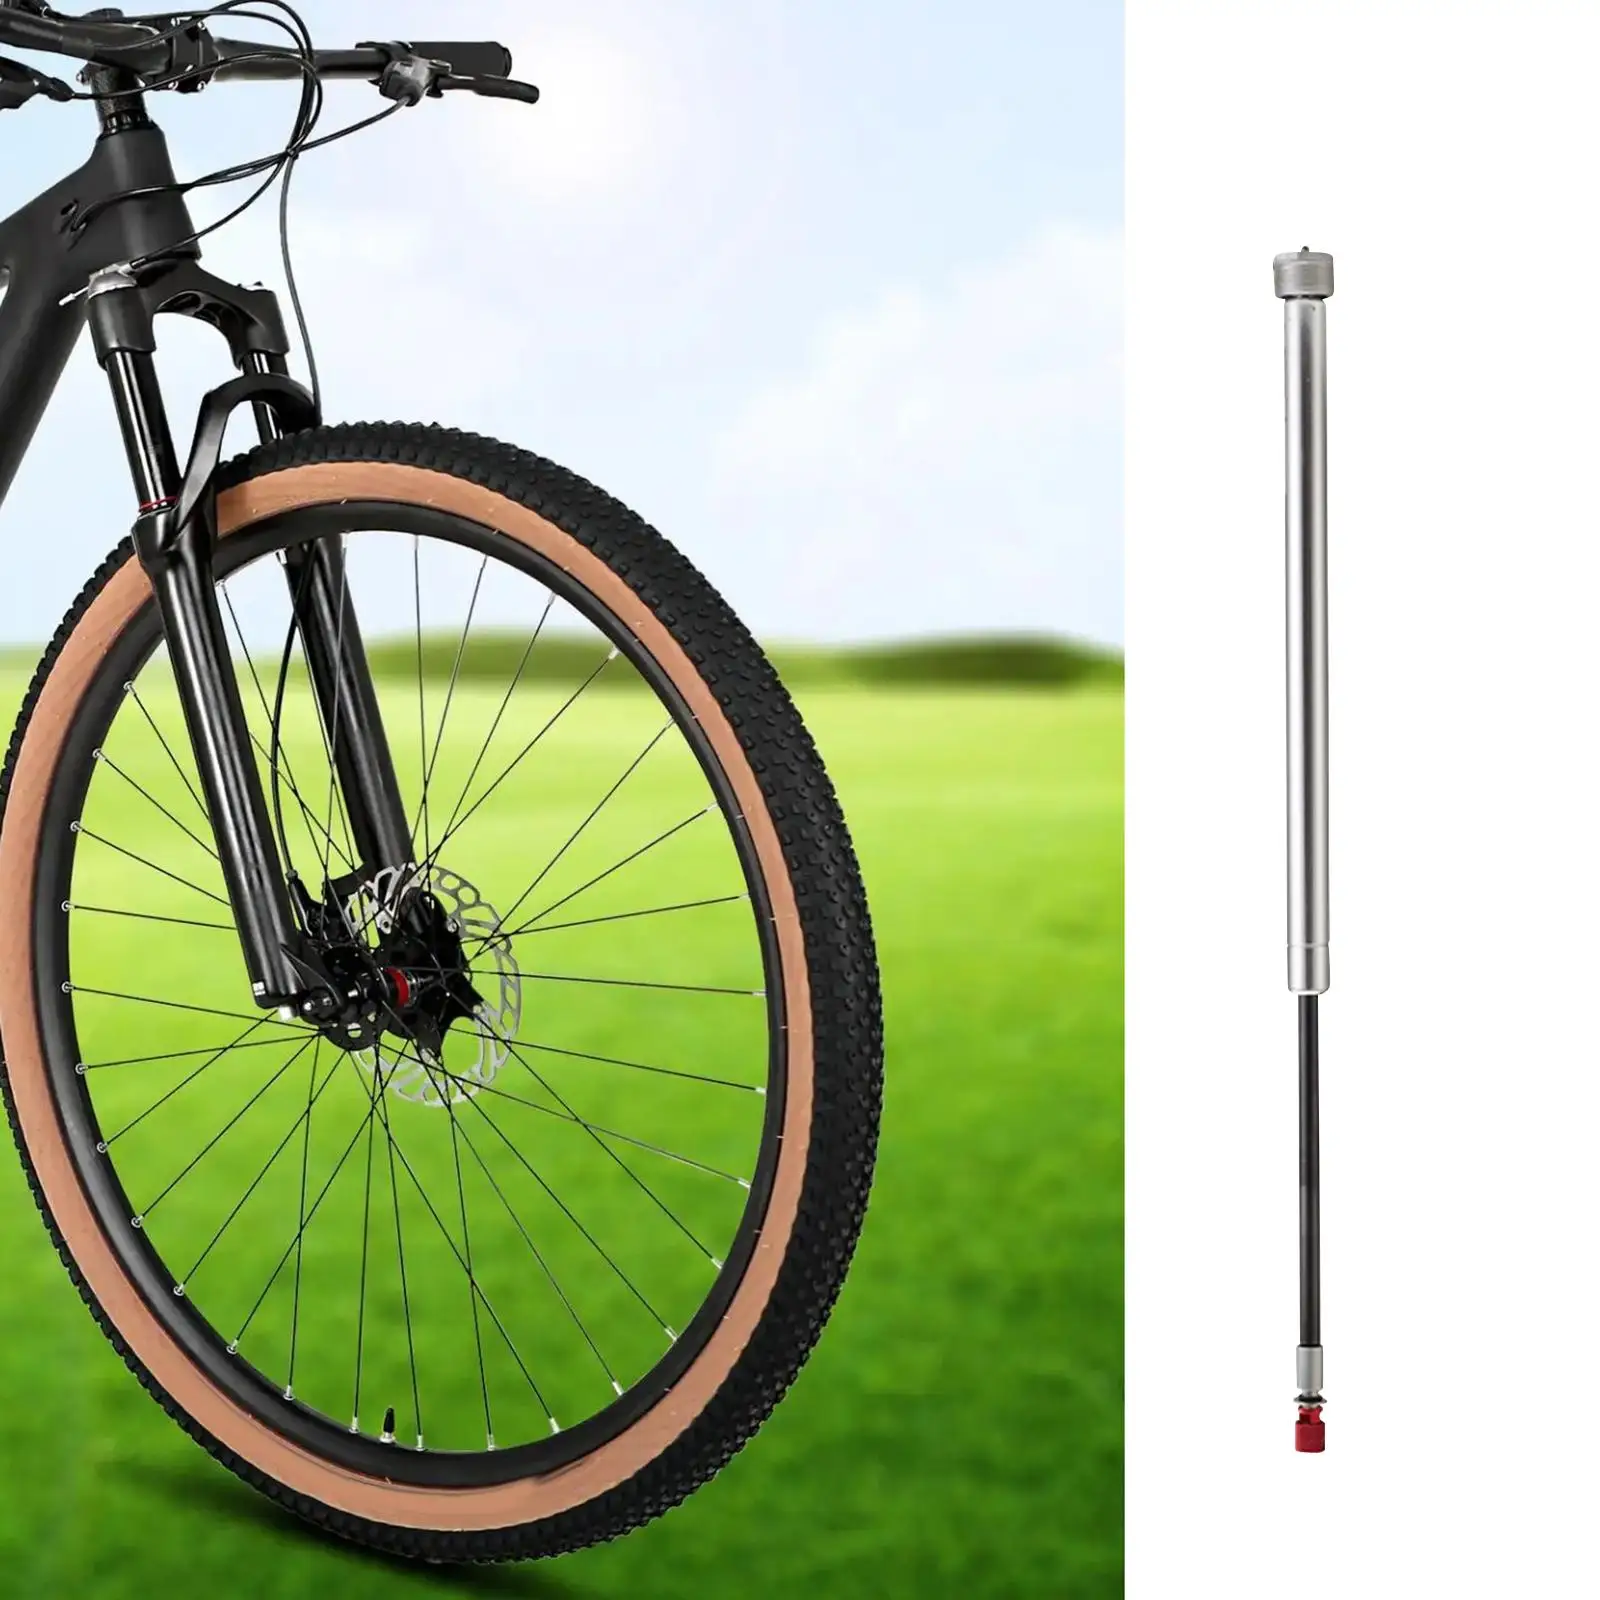 Bicycle Front Fork Repair Rod Professional High Performance Sturdy Aluminum Alloy Quality Air Damping Rod for Mountain Bike